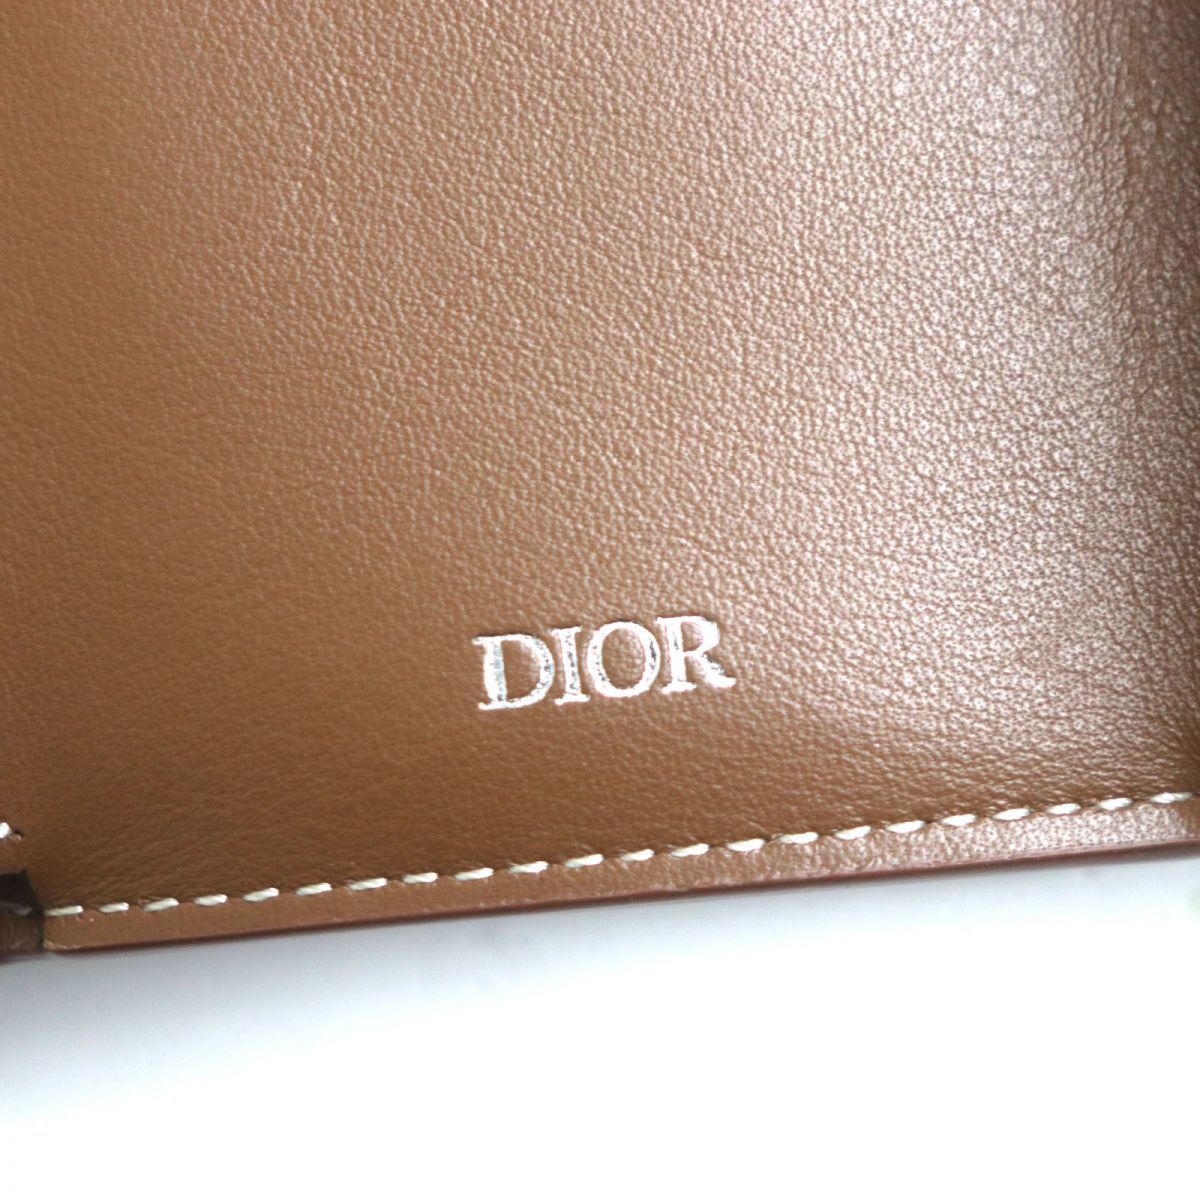  unused goods VDIOR Dior Homme 2ESBC110 CD diamond leather 3. folding purse / compact wallet tea goal metal fittings made in Italy men's box * sack attaching 